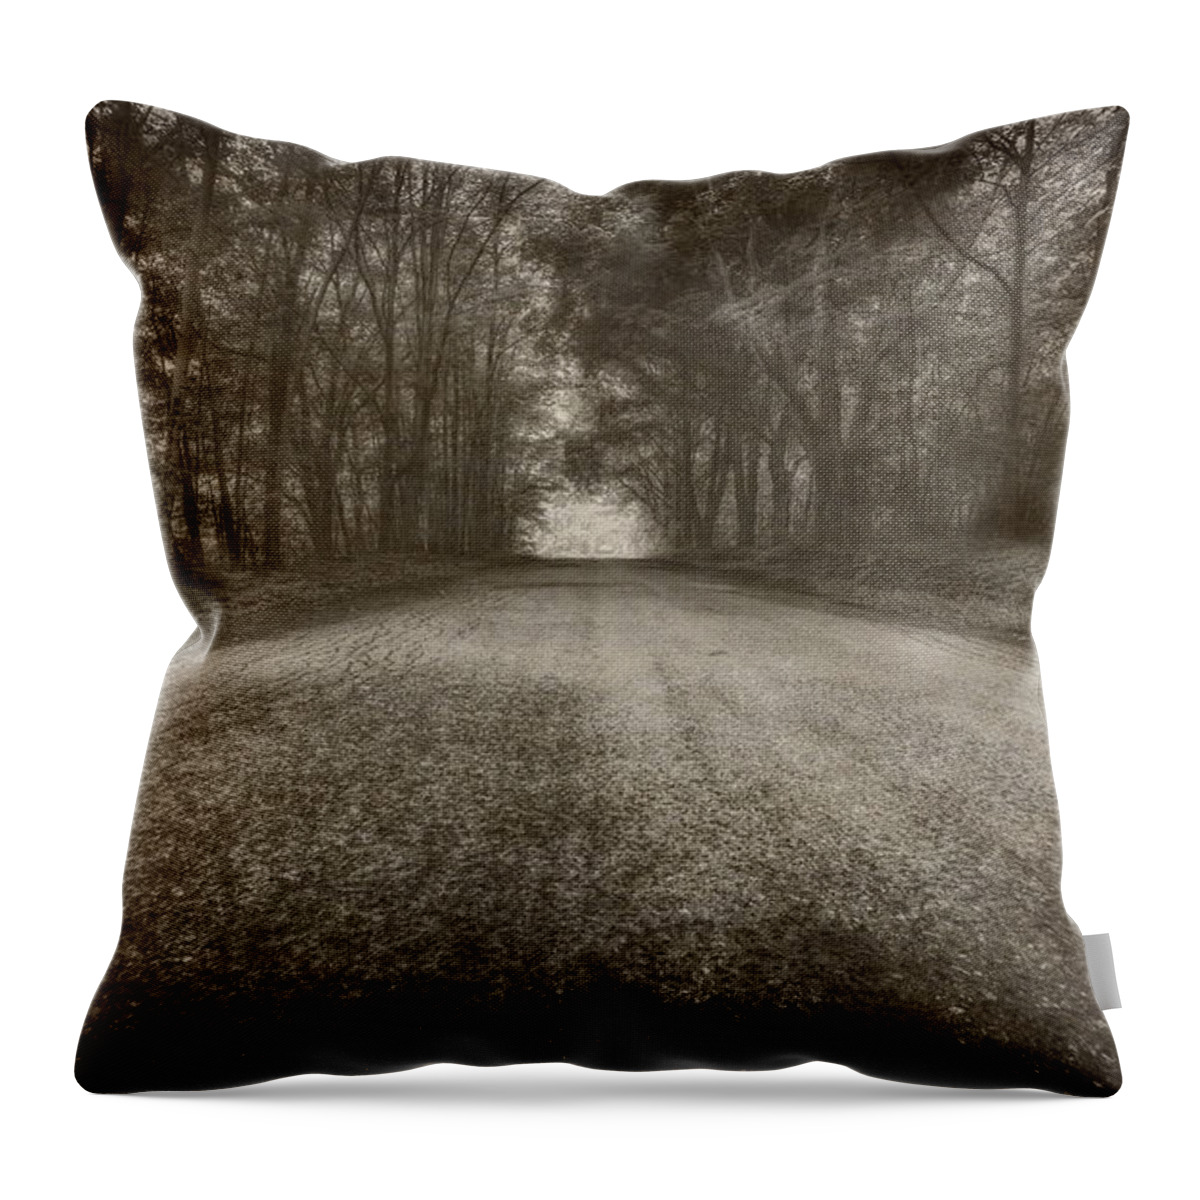 Country Throw Pillow featuring the photograph Country Road by Everet Regal